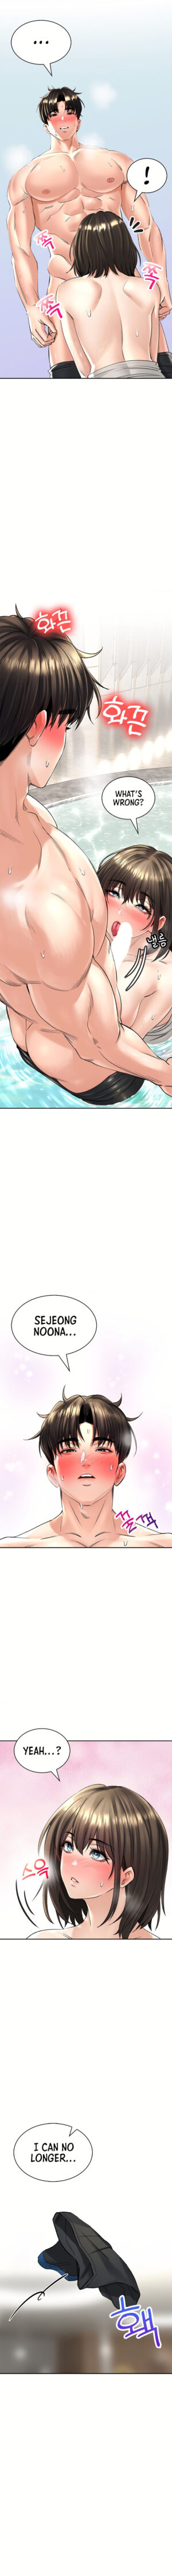 [Lee Juwon] Herbal Love Story (1-25) [English] [Omega Scans] [Ongoing]